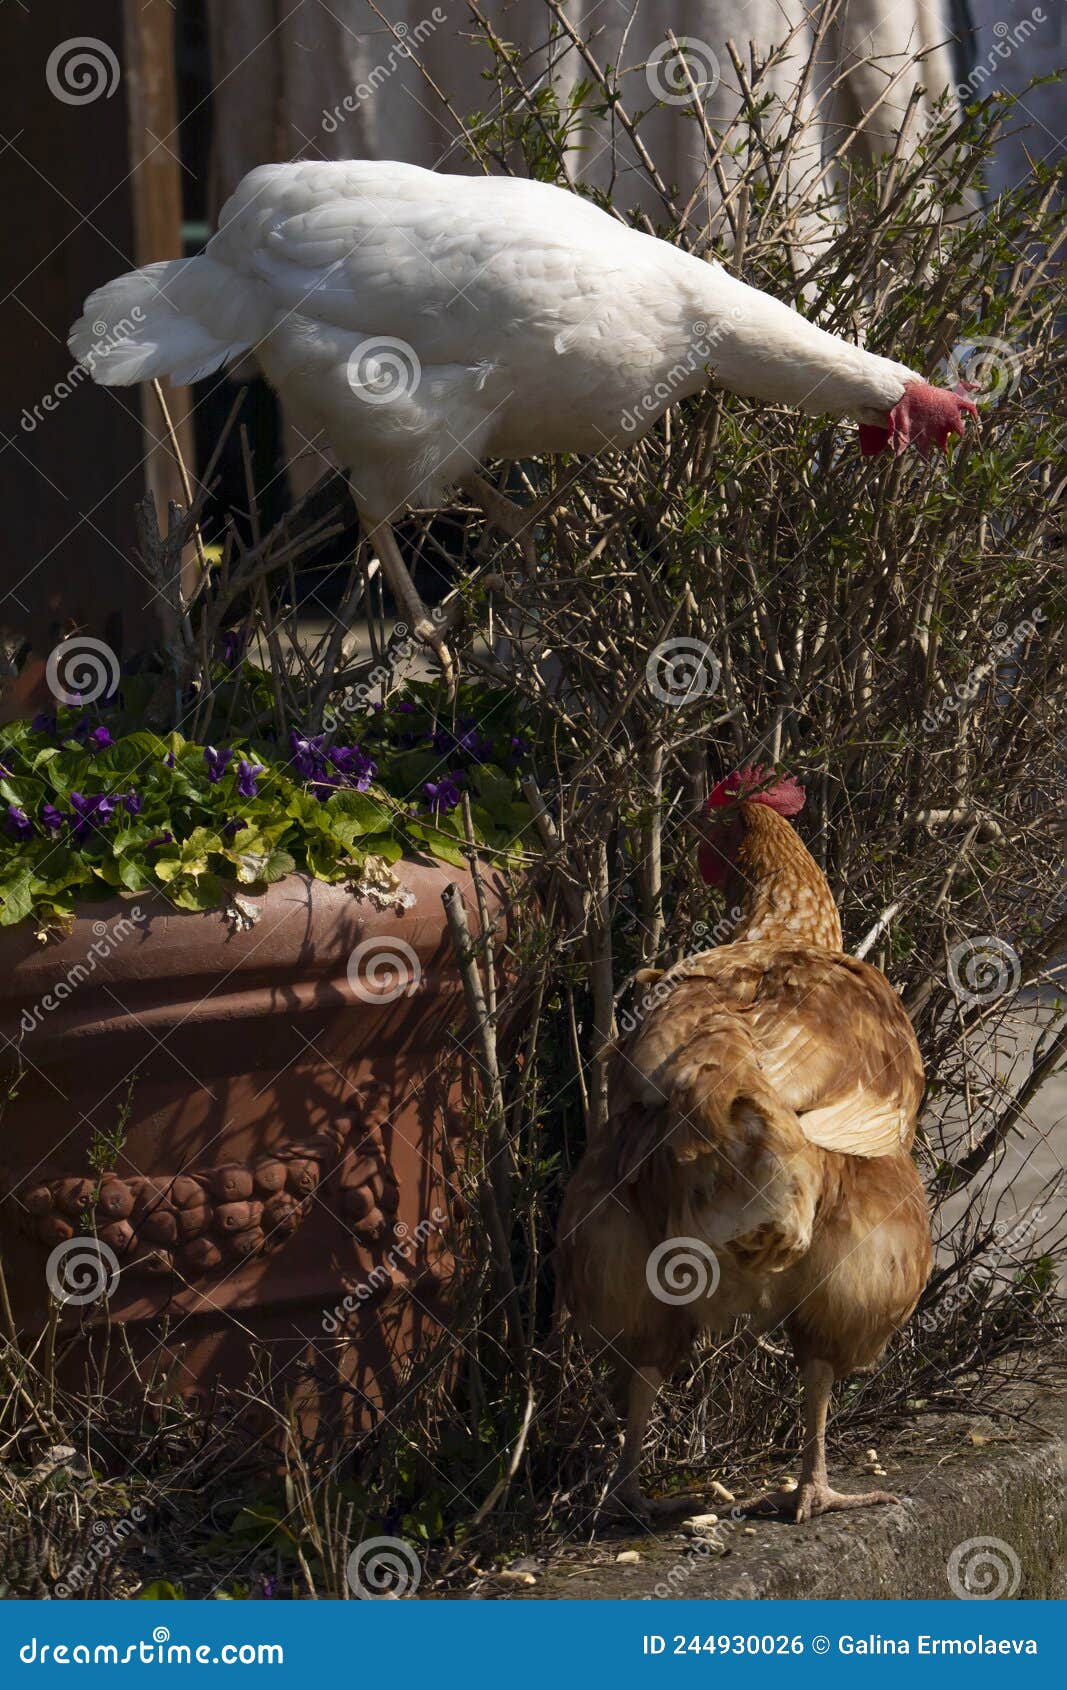 the rooster and the hen climbed into the garden and pecked at the bush